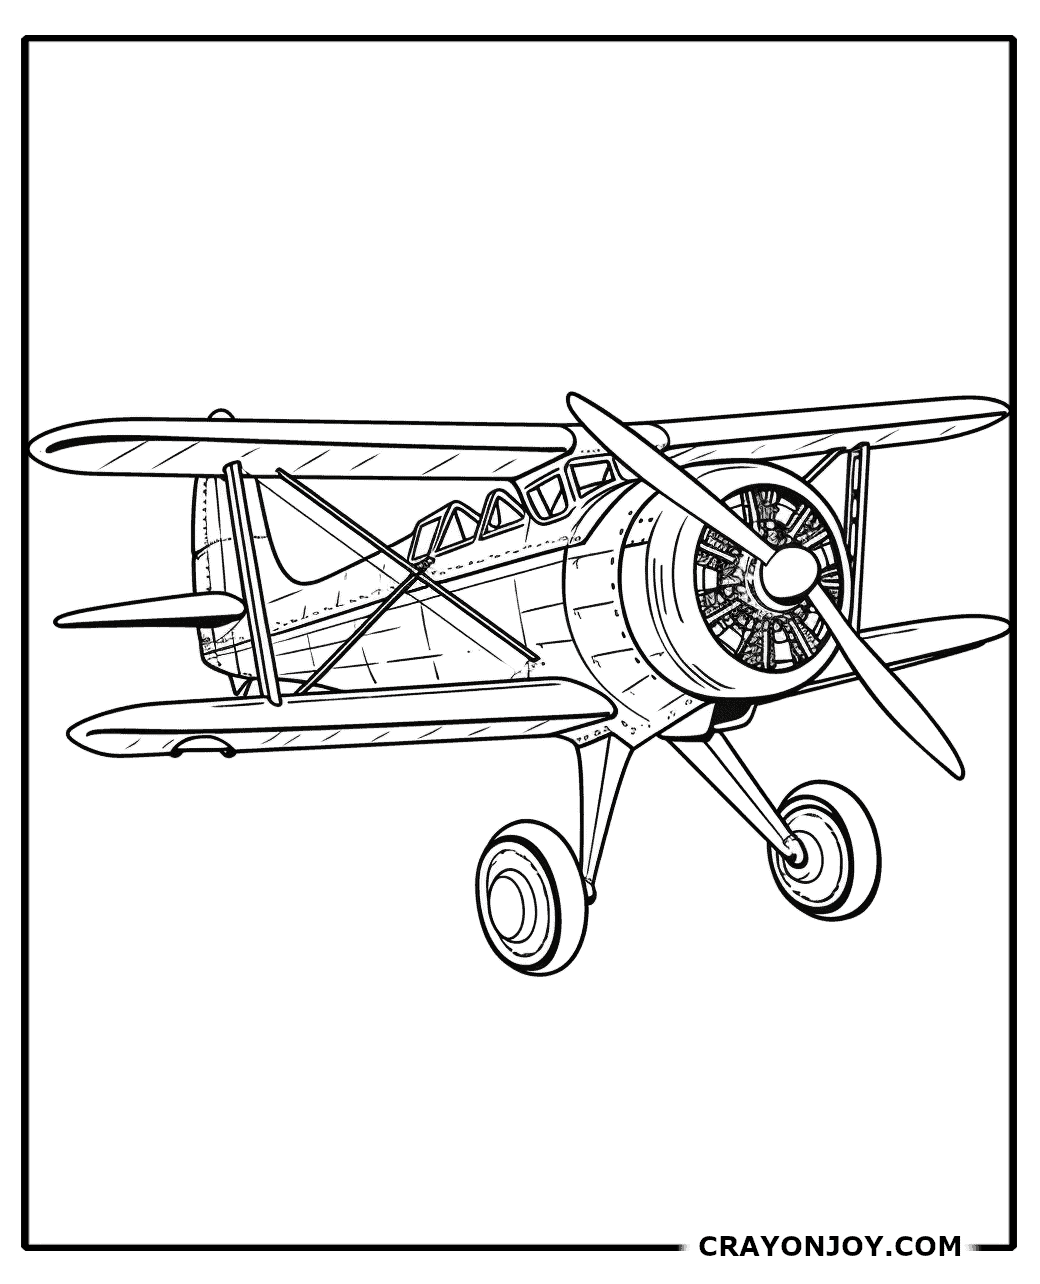 Free Printable Airplane Coloring Pages for Kids and Adults